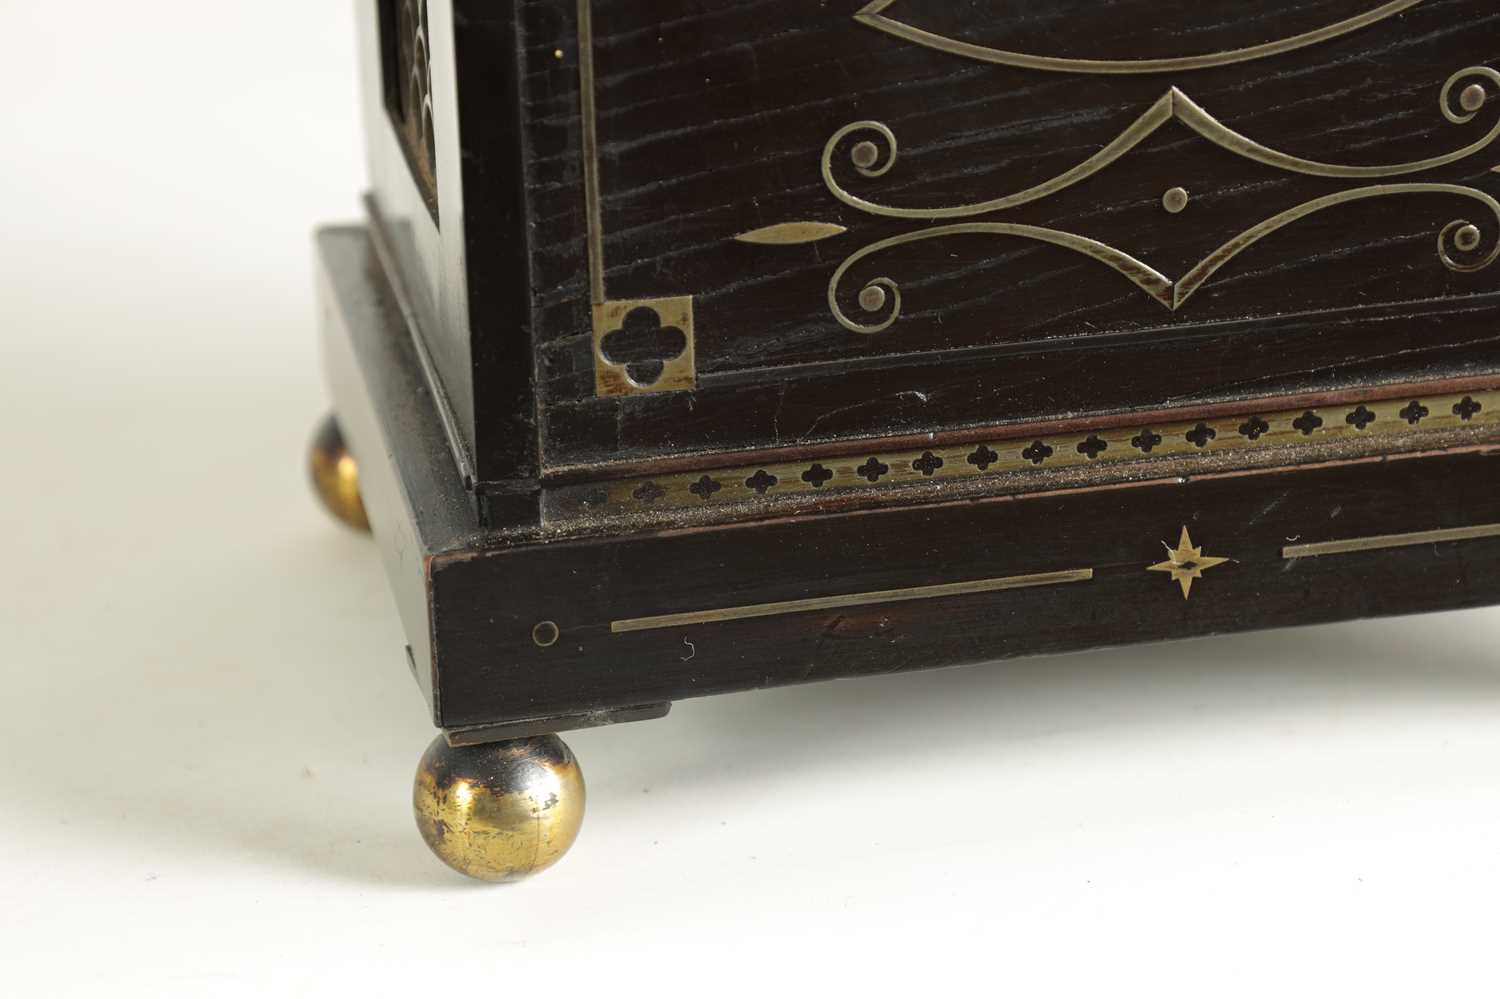 A SMALL REGENCY BRASS INLAID EBONISED DOUBLE FUSEE MANTEL CLOCK - Image 3 of 8